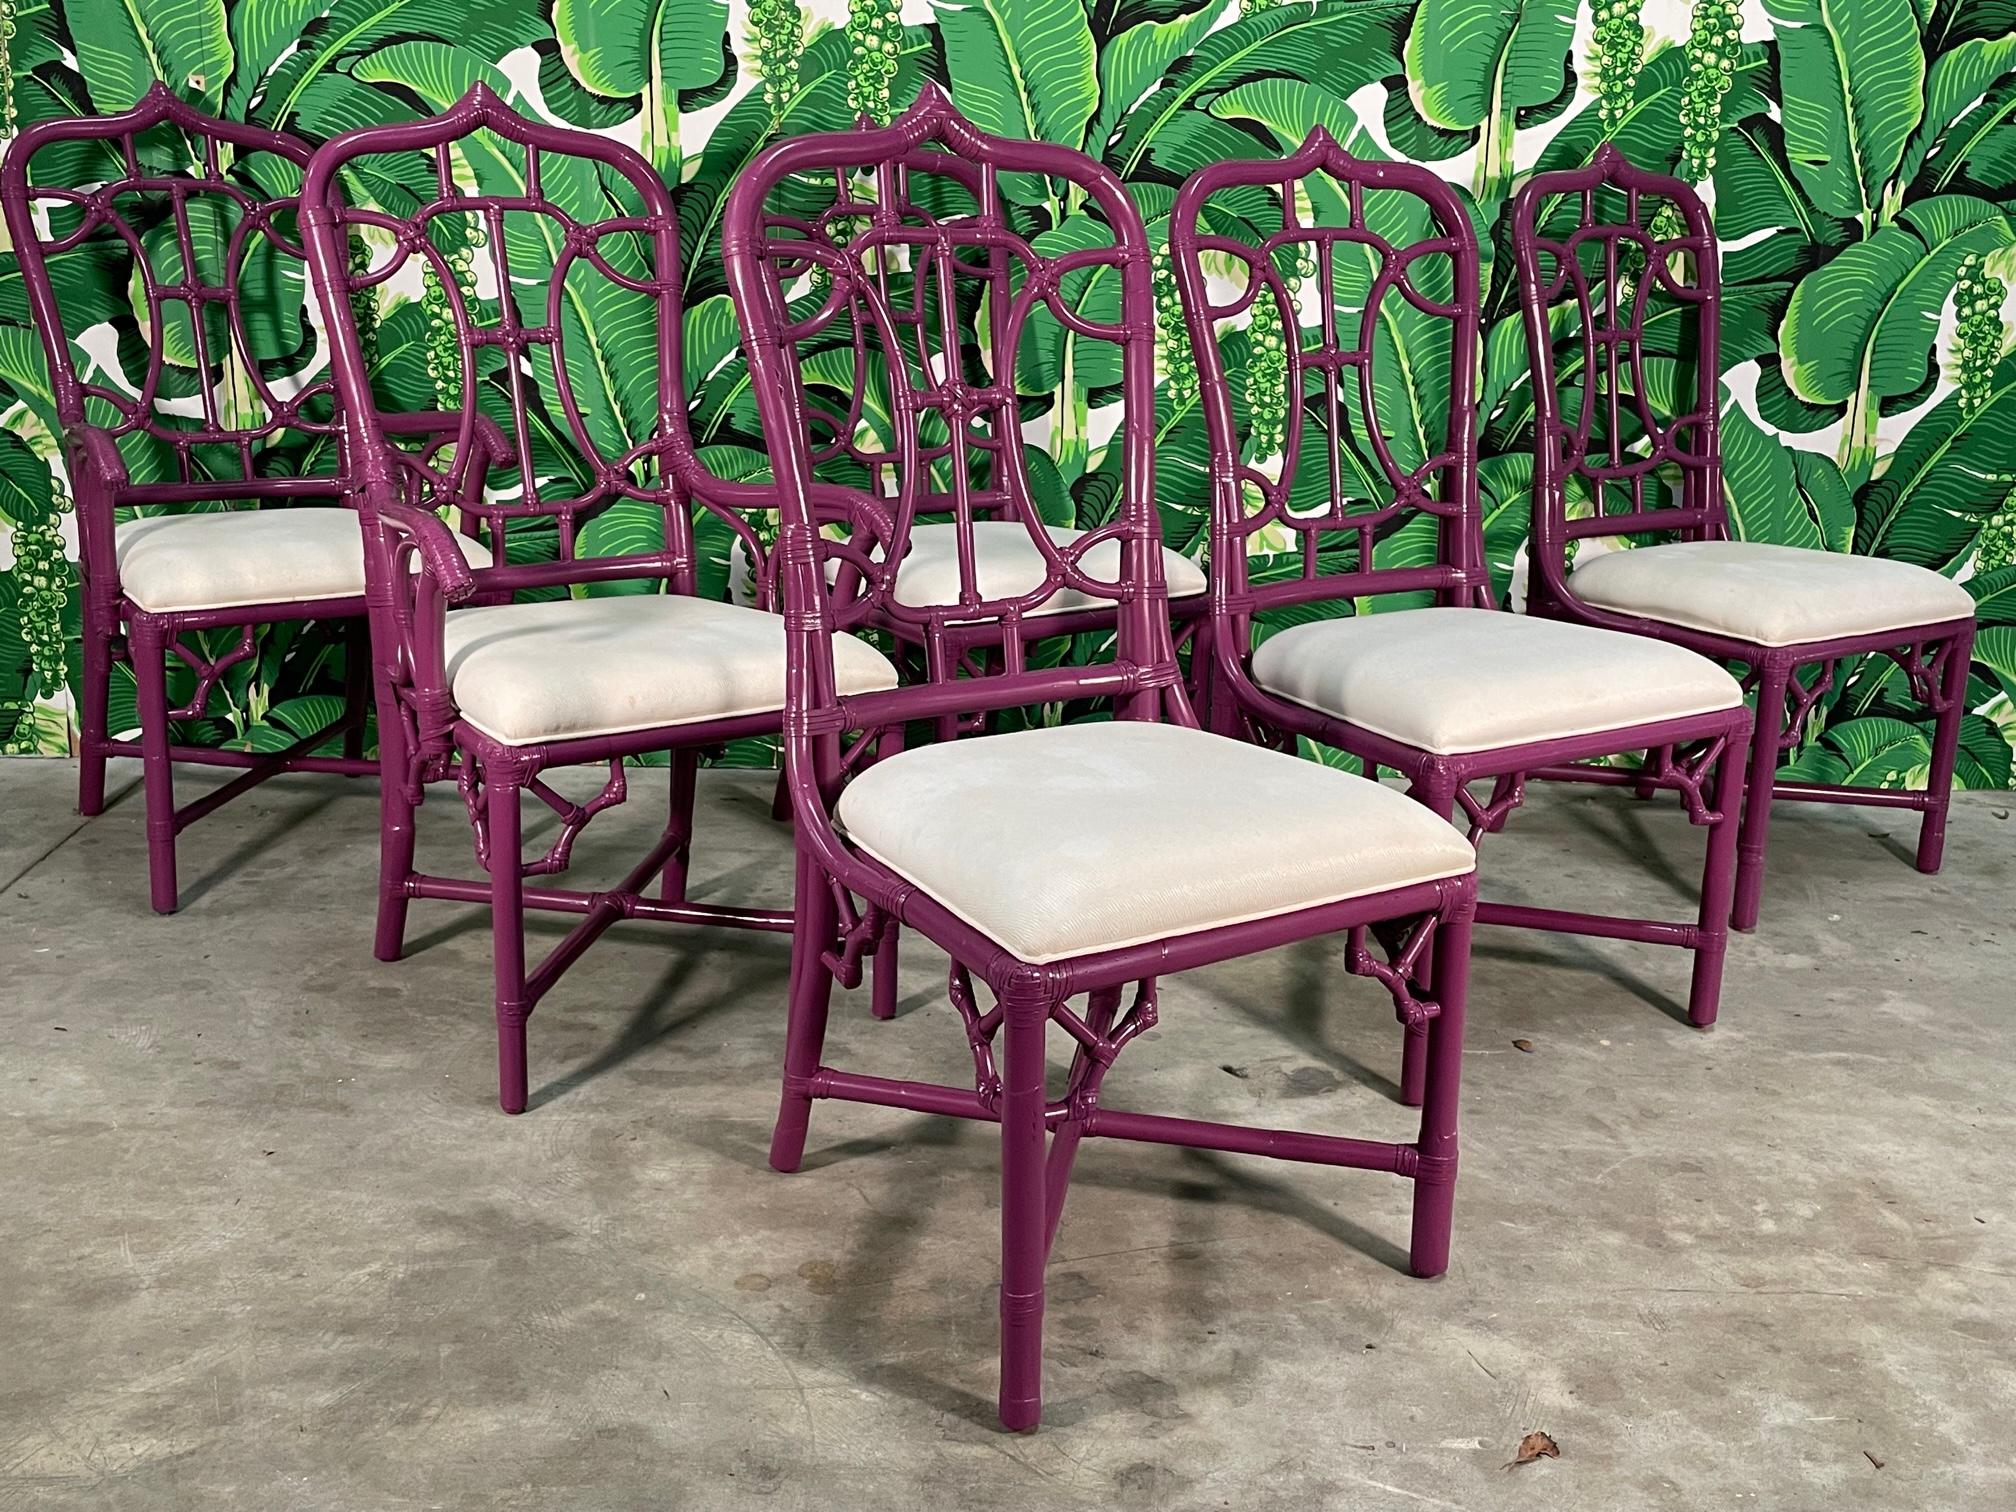 Set of 6 rattan cathedral dining chairs in the style of McGuire feature an organic curved fretwork and a newly lacquered gloss finish. Rattan spandrels, X stretchers, and leather lashings confirm the excellent craftsmanship of this set. Good